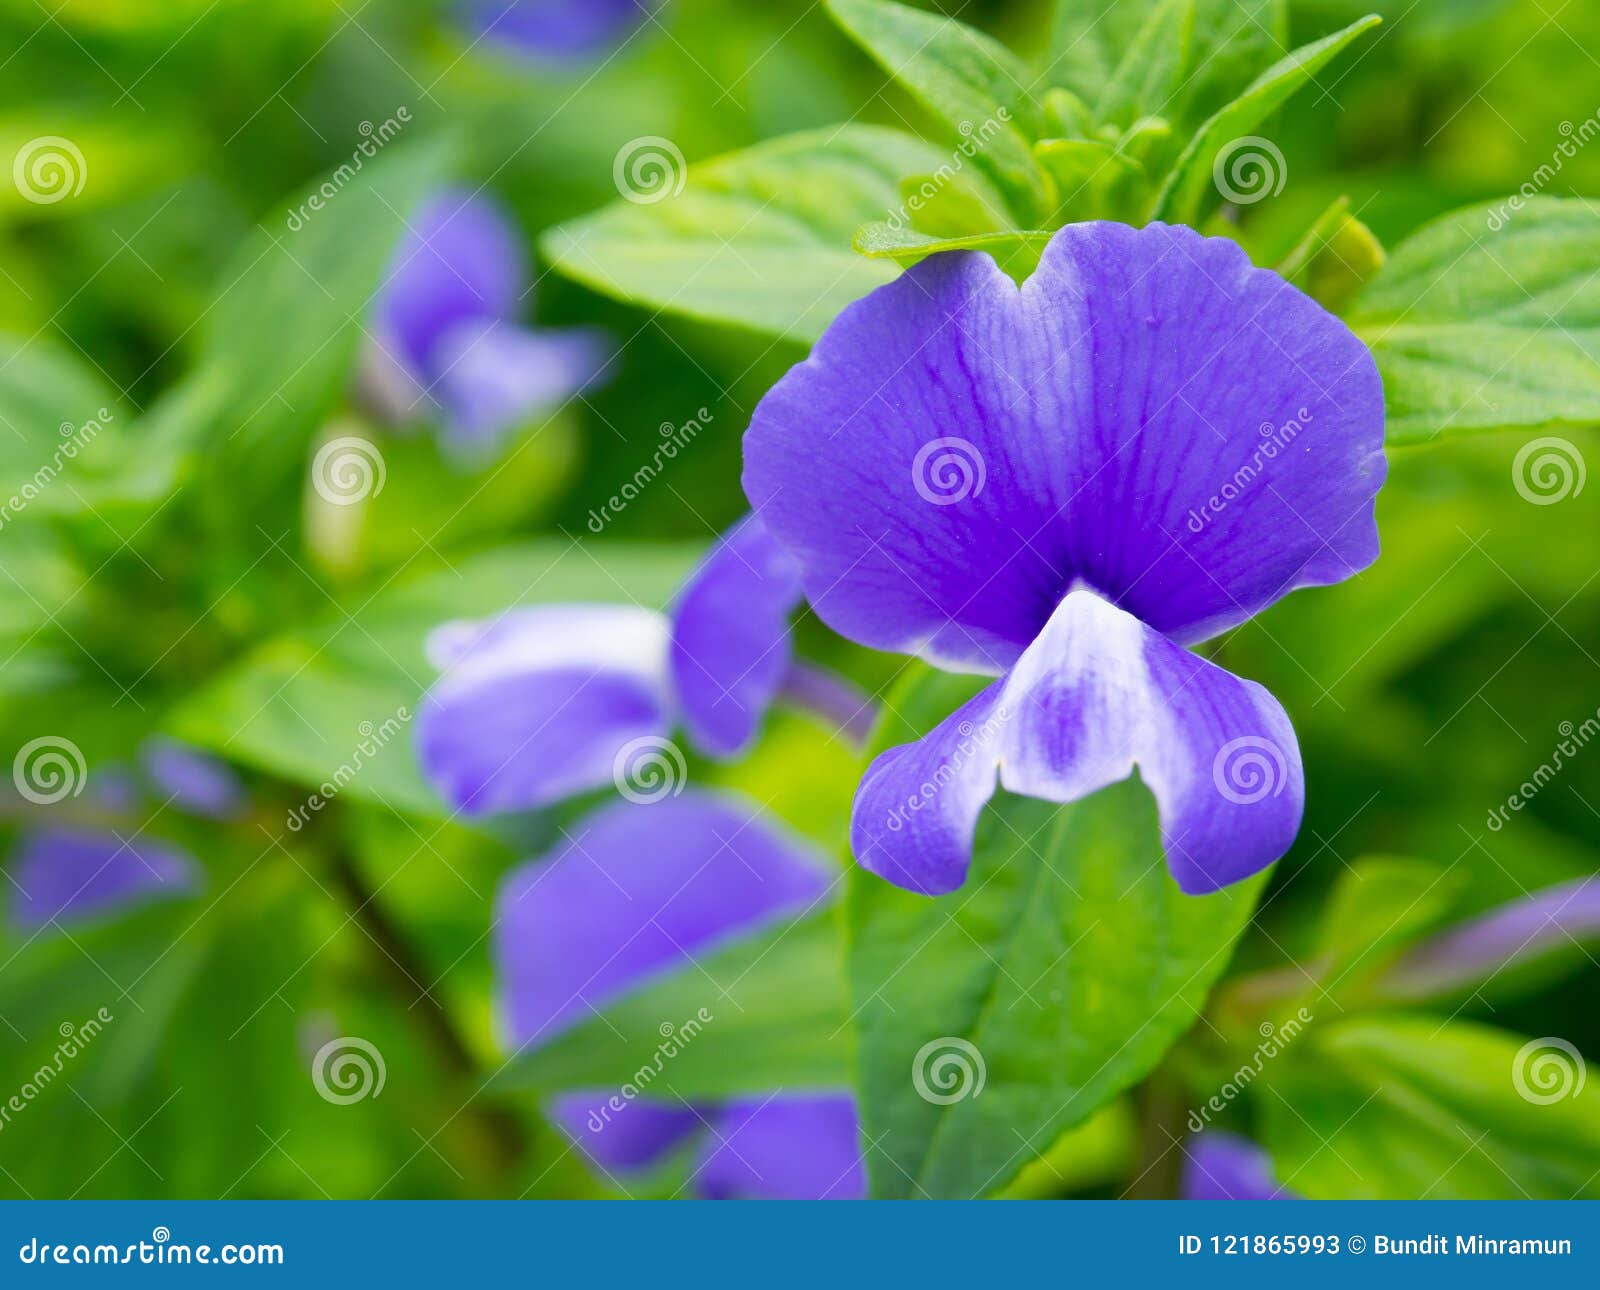 viola sororia, known commonly as the common blue violet, is a short-stemmed herbaceous perennial plant.